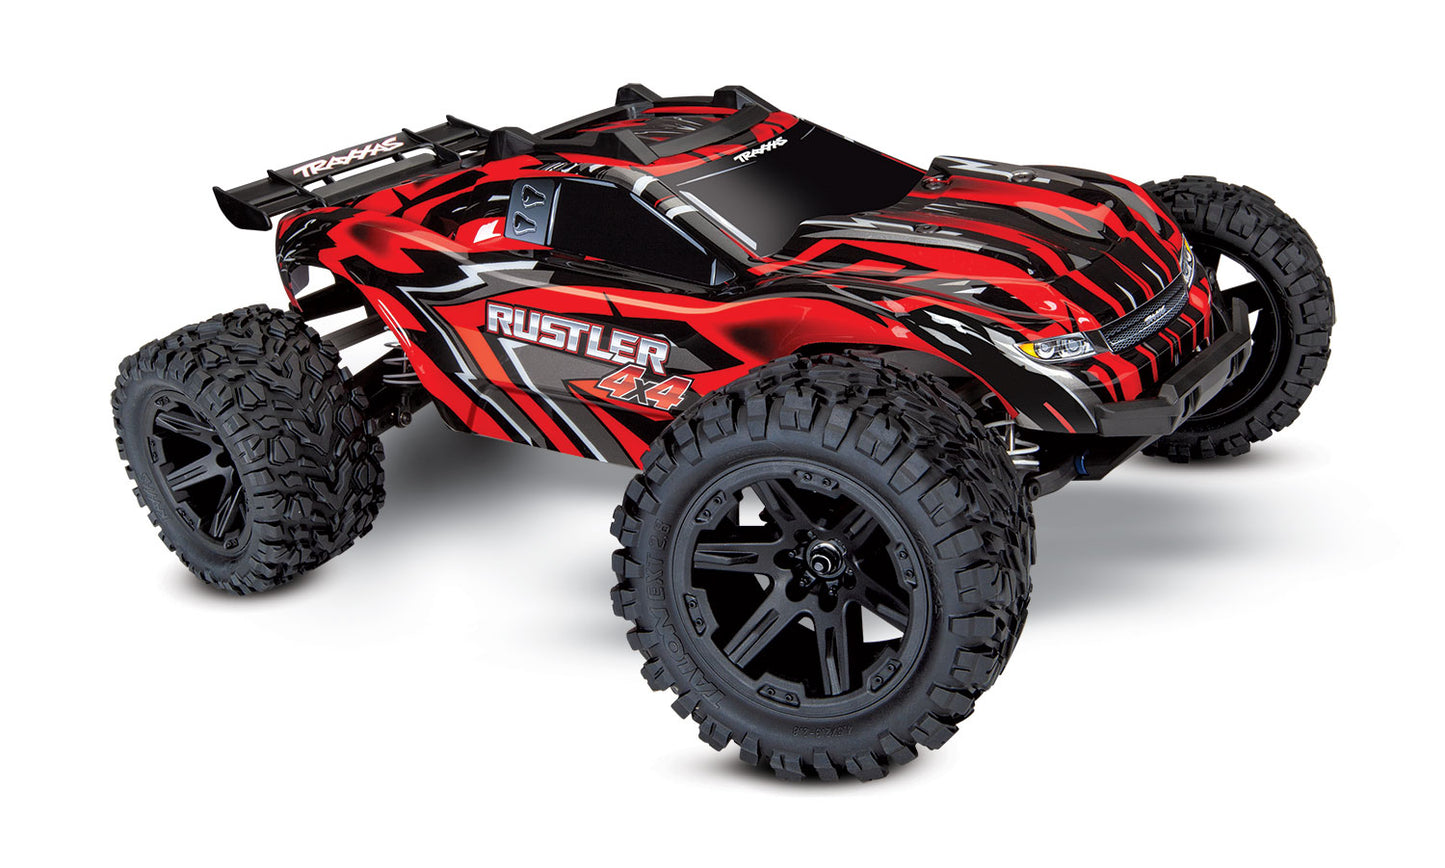 Traxxas Rustler 4X4 1/10 4WD Stadium Truck RTR - Green LED with TQ 2.4GHz radio system and XL-5 ESC - with 7-cell NiMH 3000mAh and DC Charger